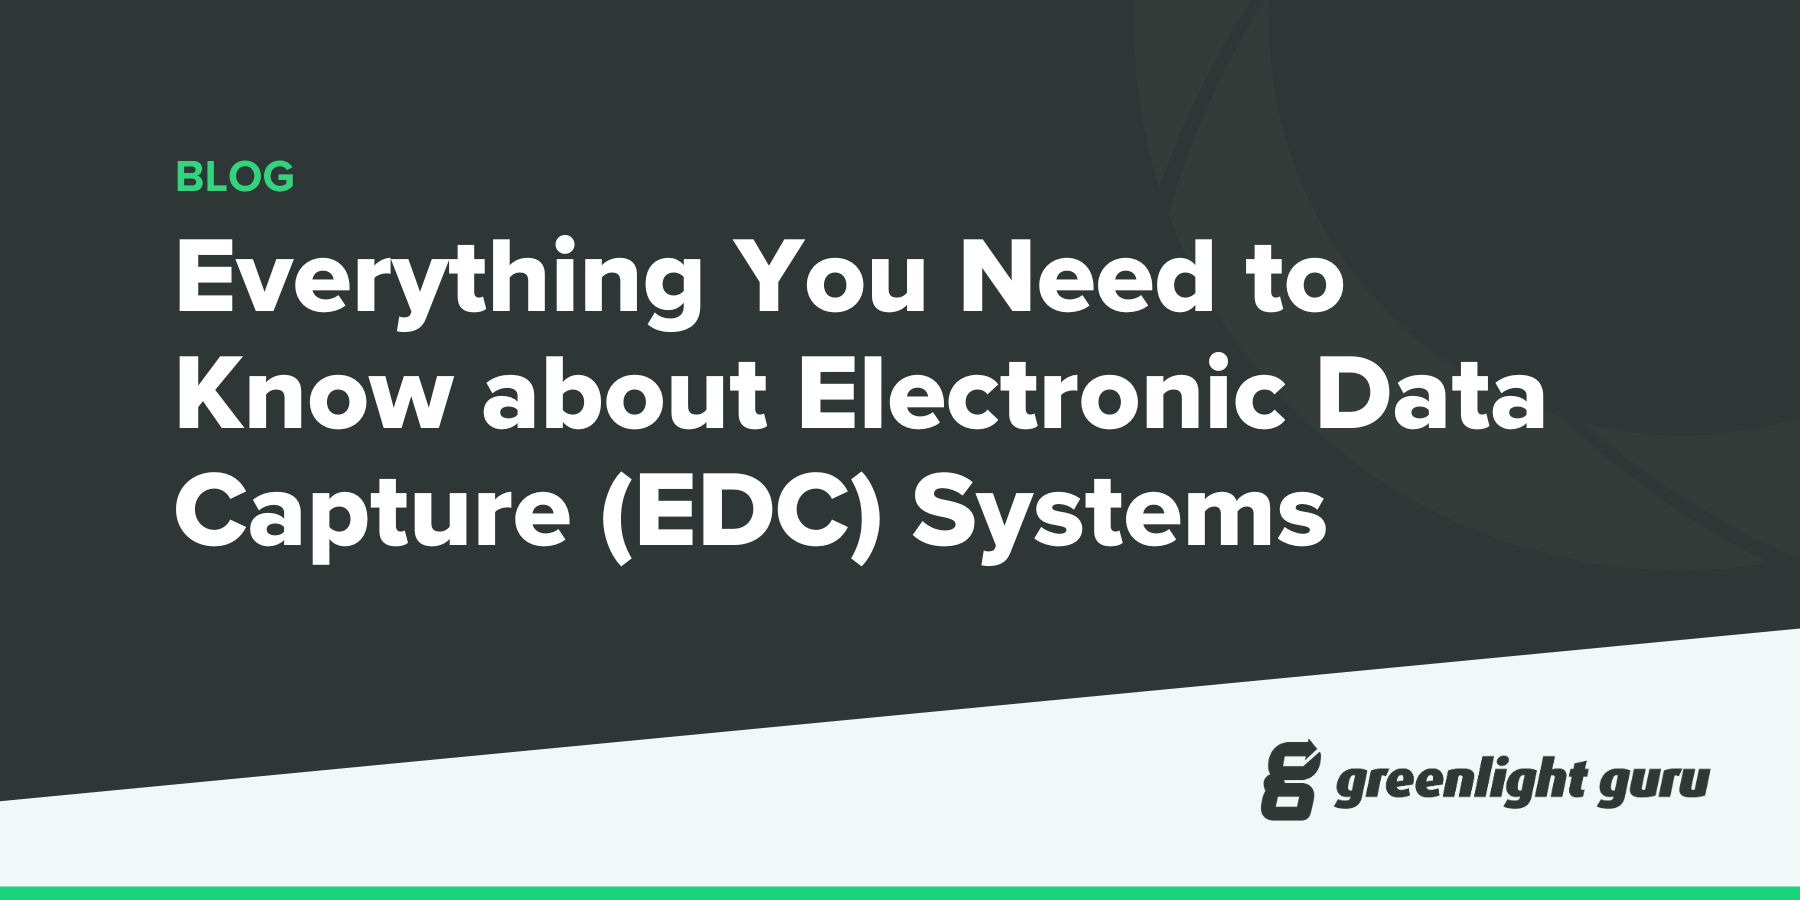 Everything You Need to Know about Electronic Data Capture (EDC) Systems (new)